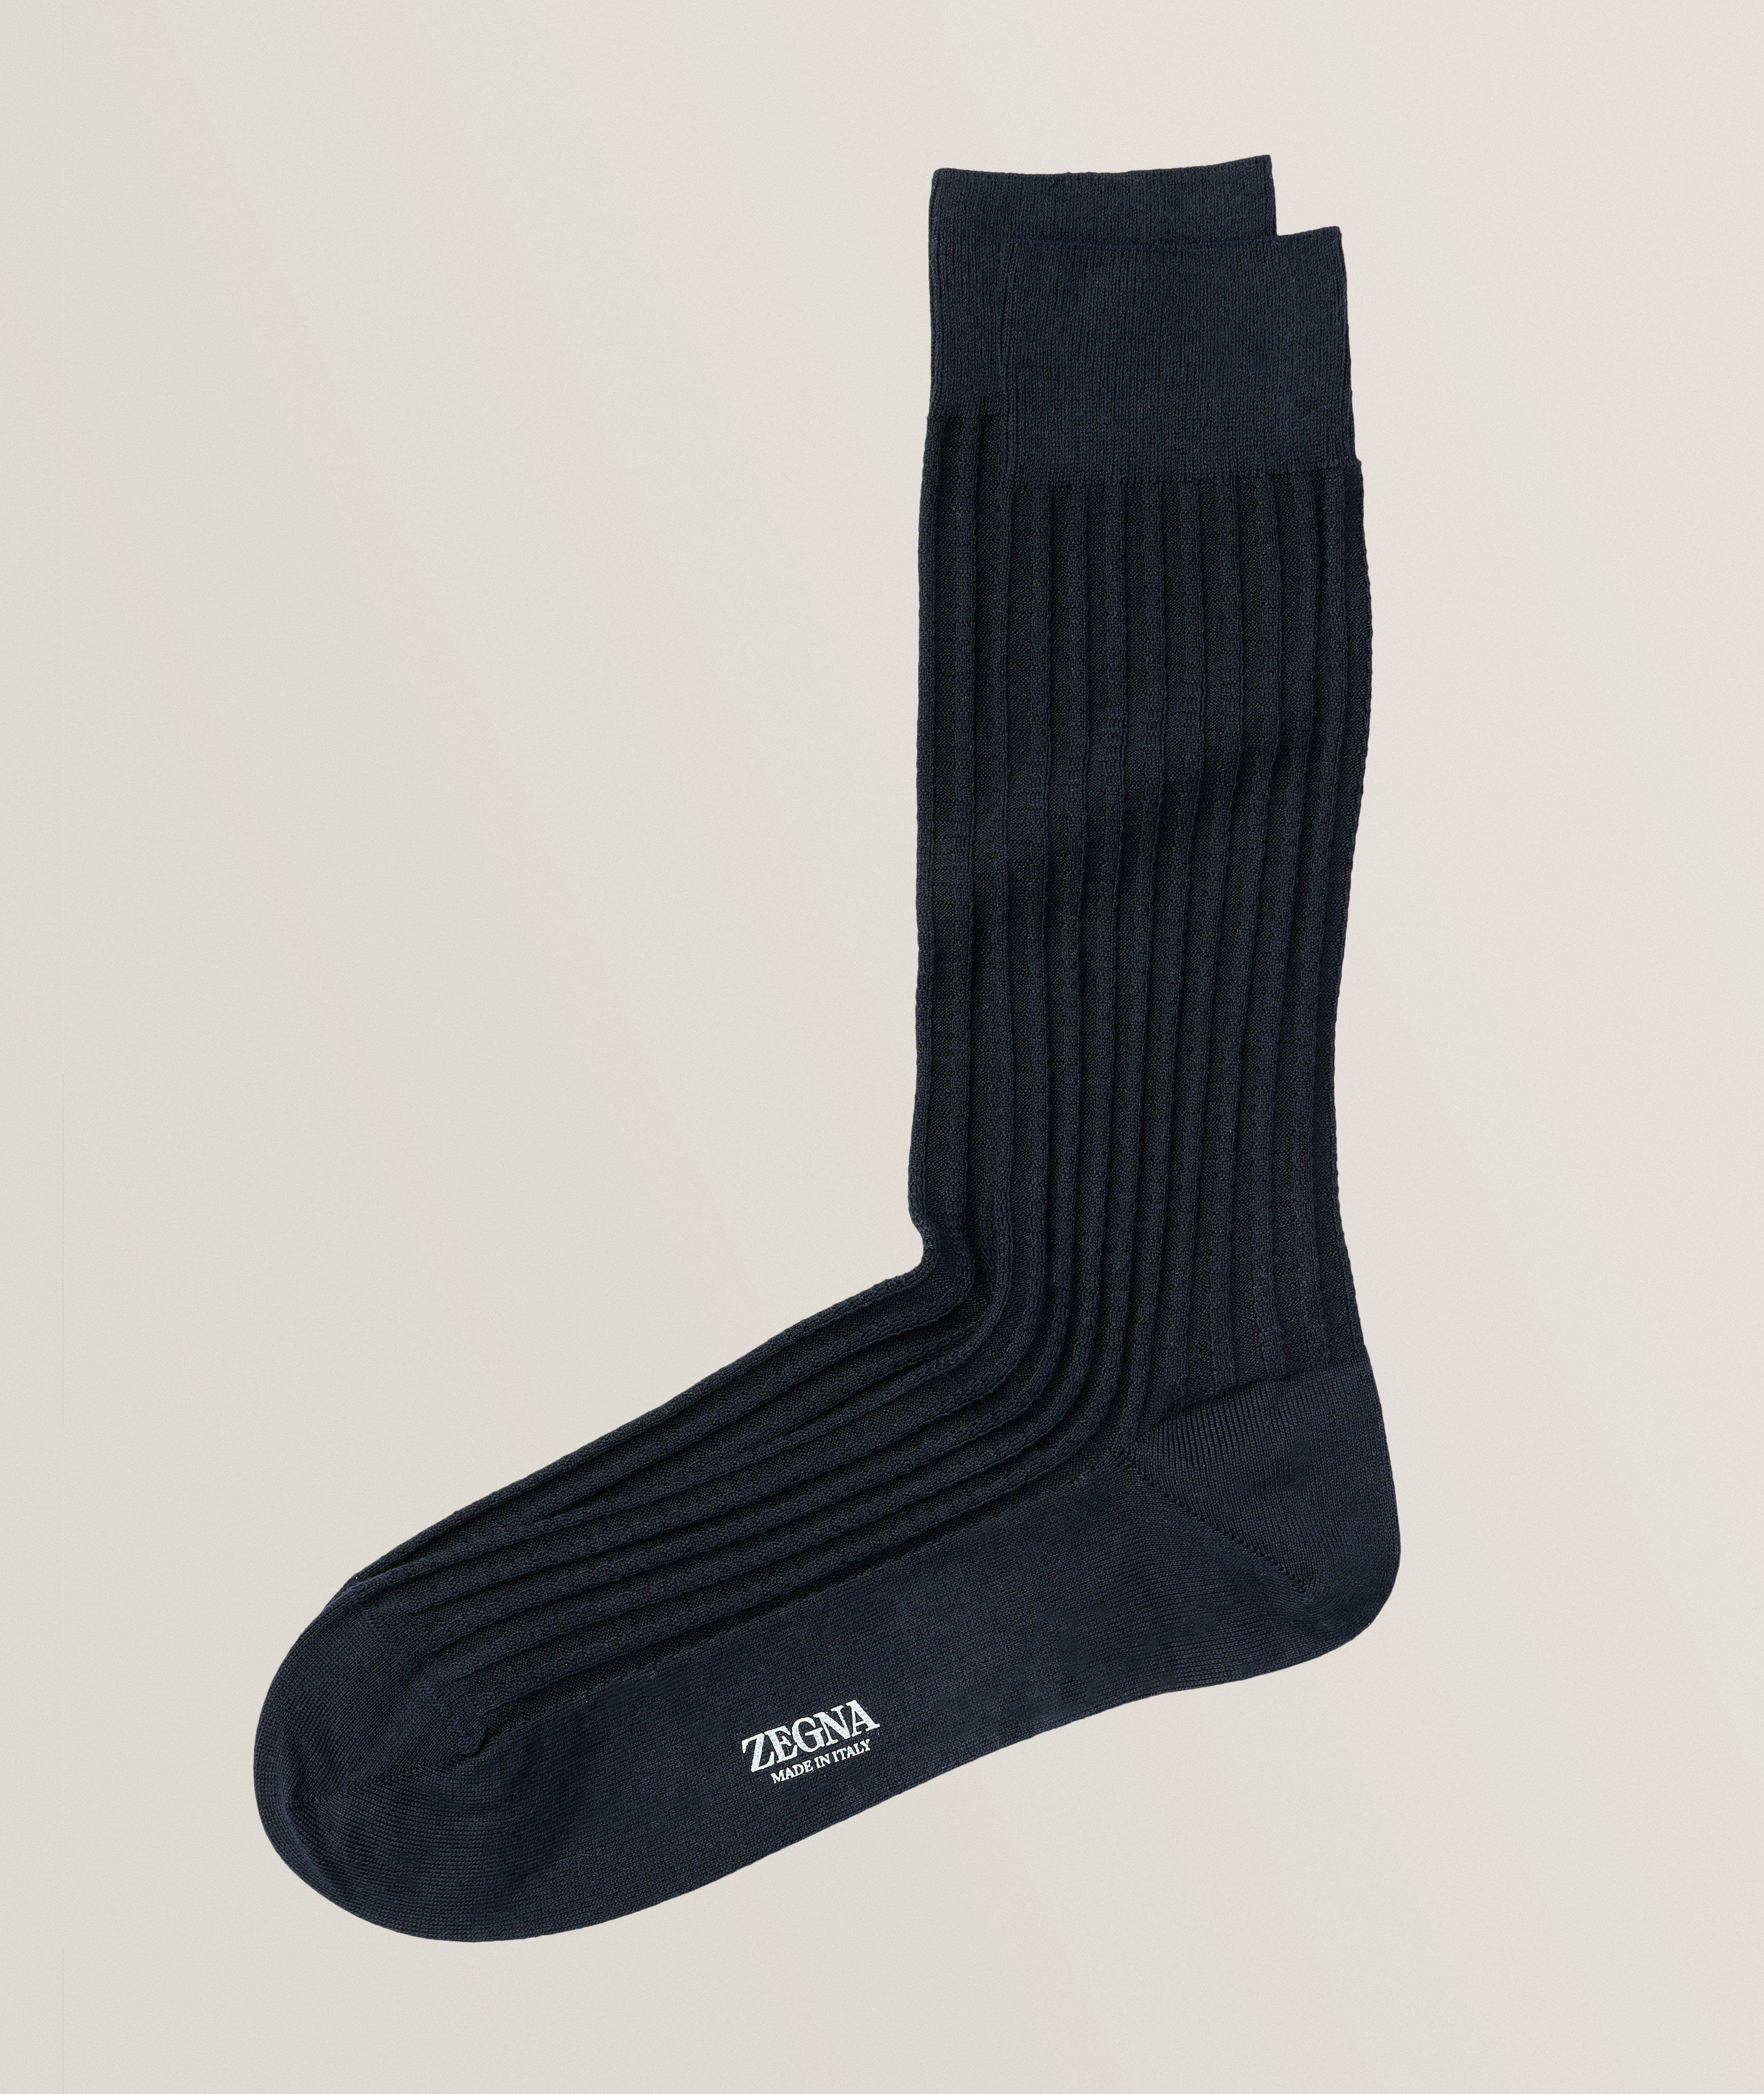 Texture Above All Stretch-Organic Cotton Blend Socks  image 0